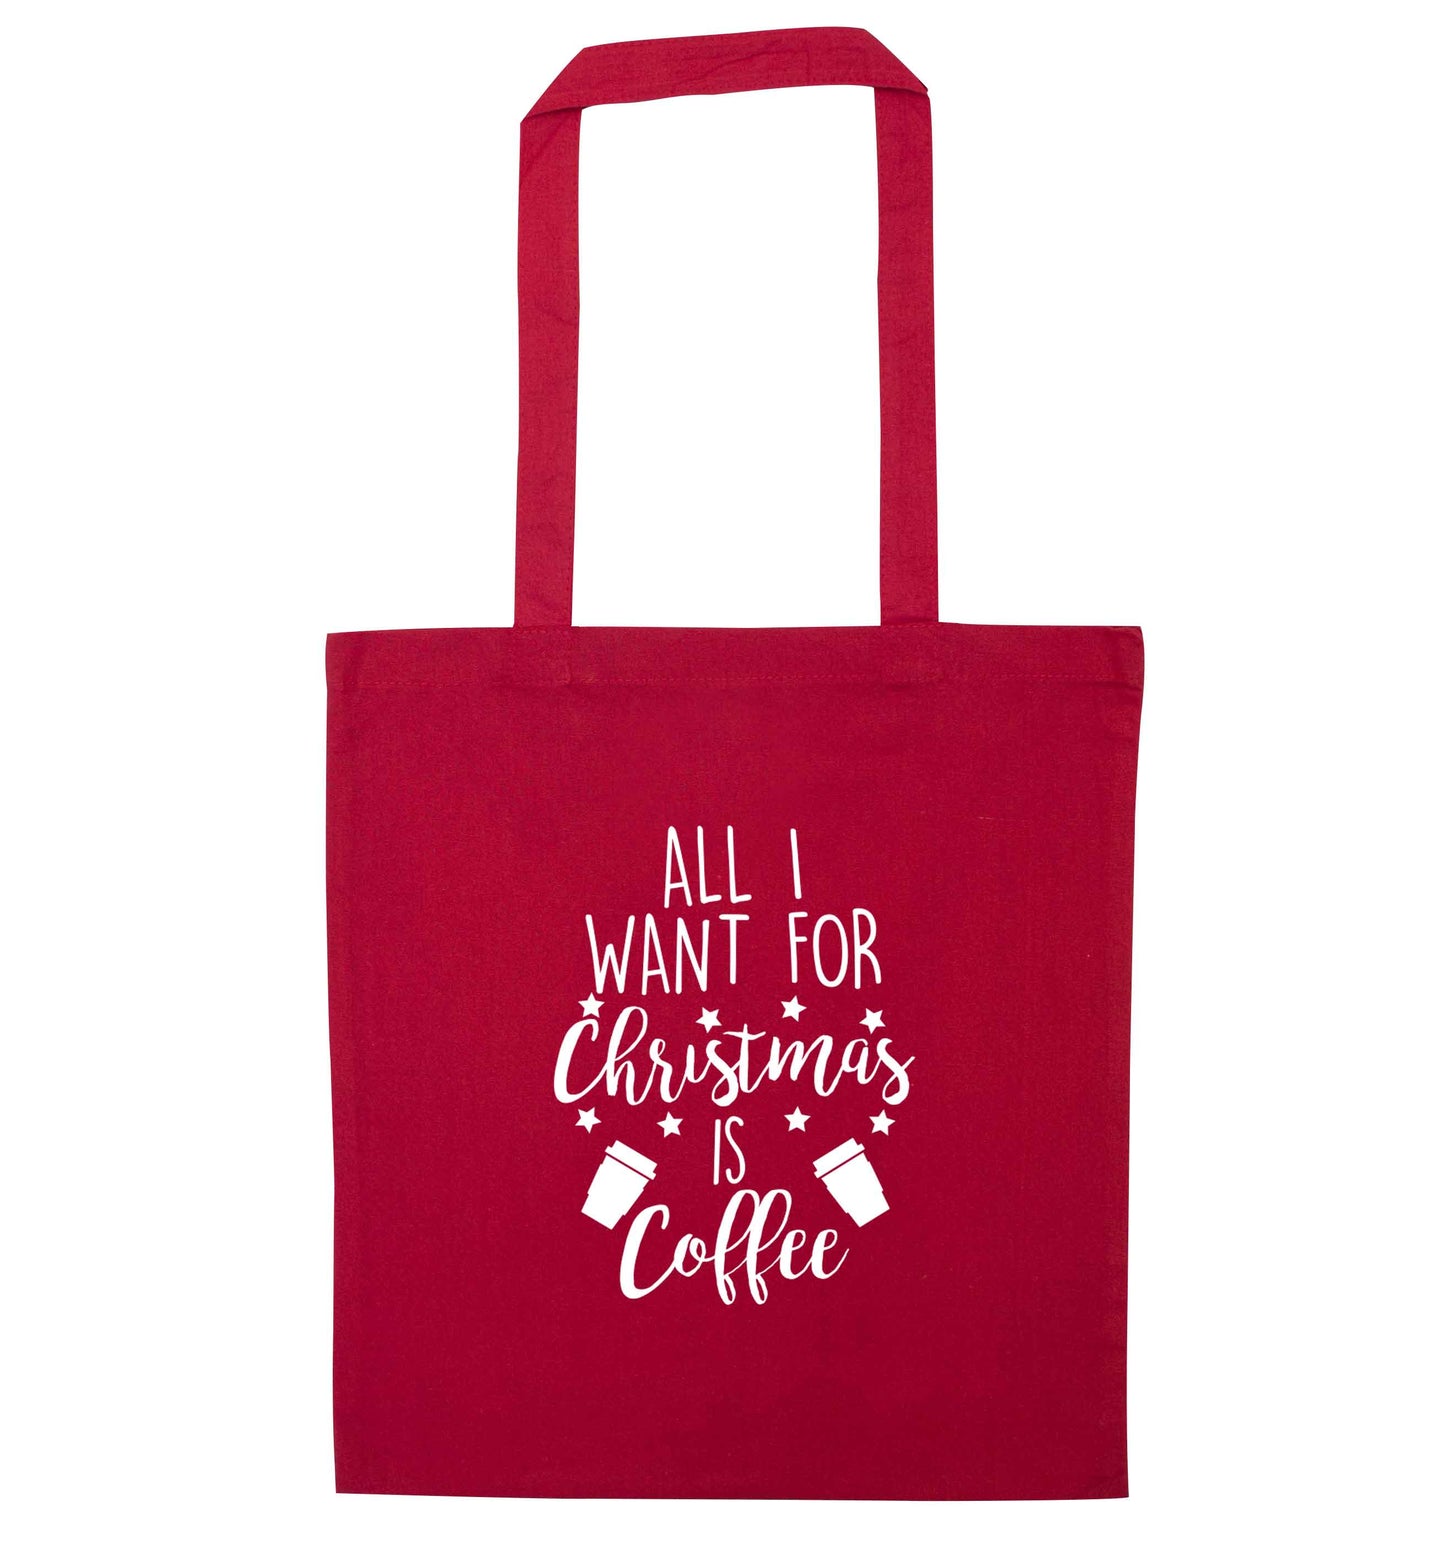 All I want for Christmas is coffee red tote bag